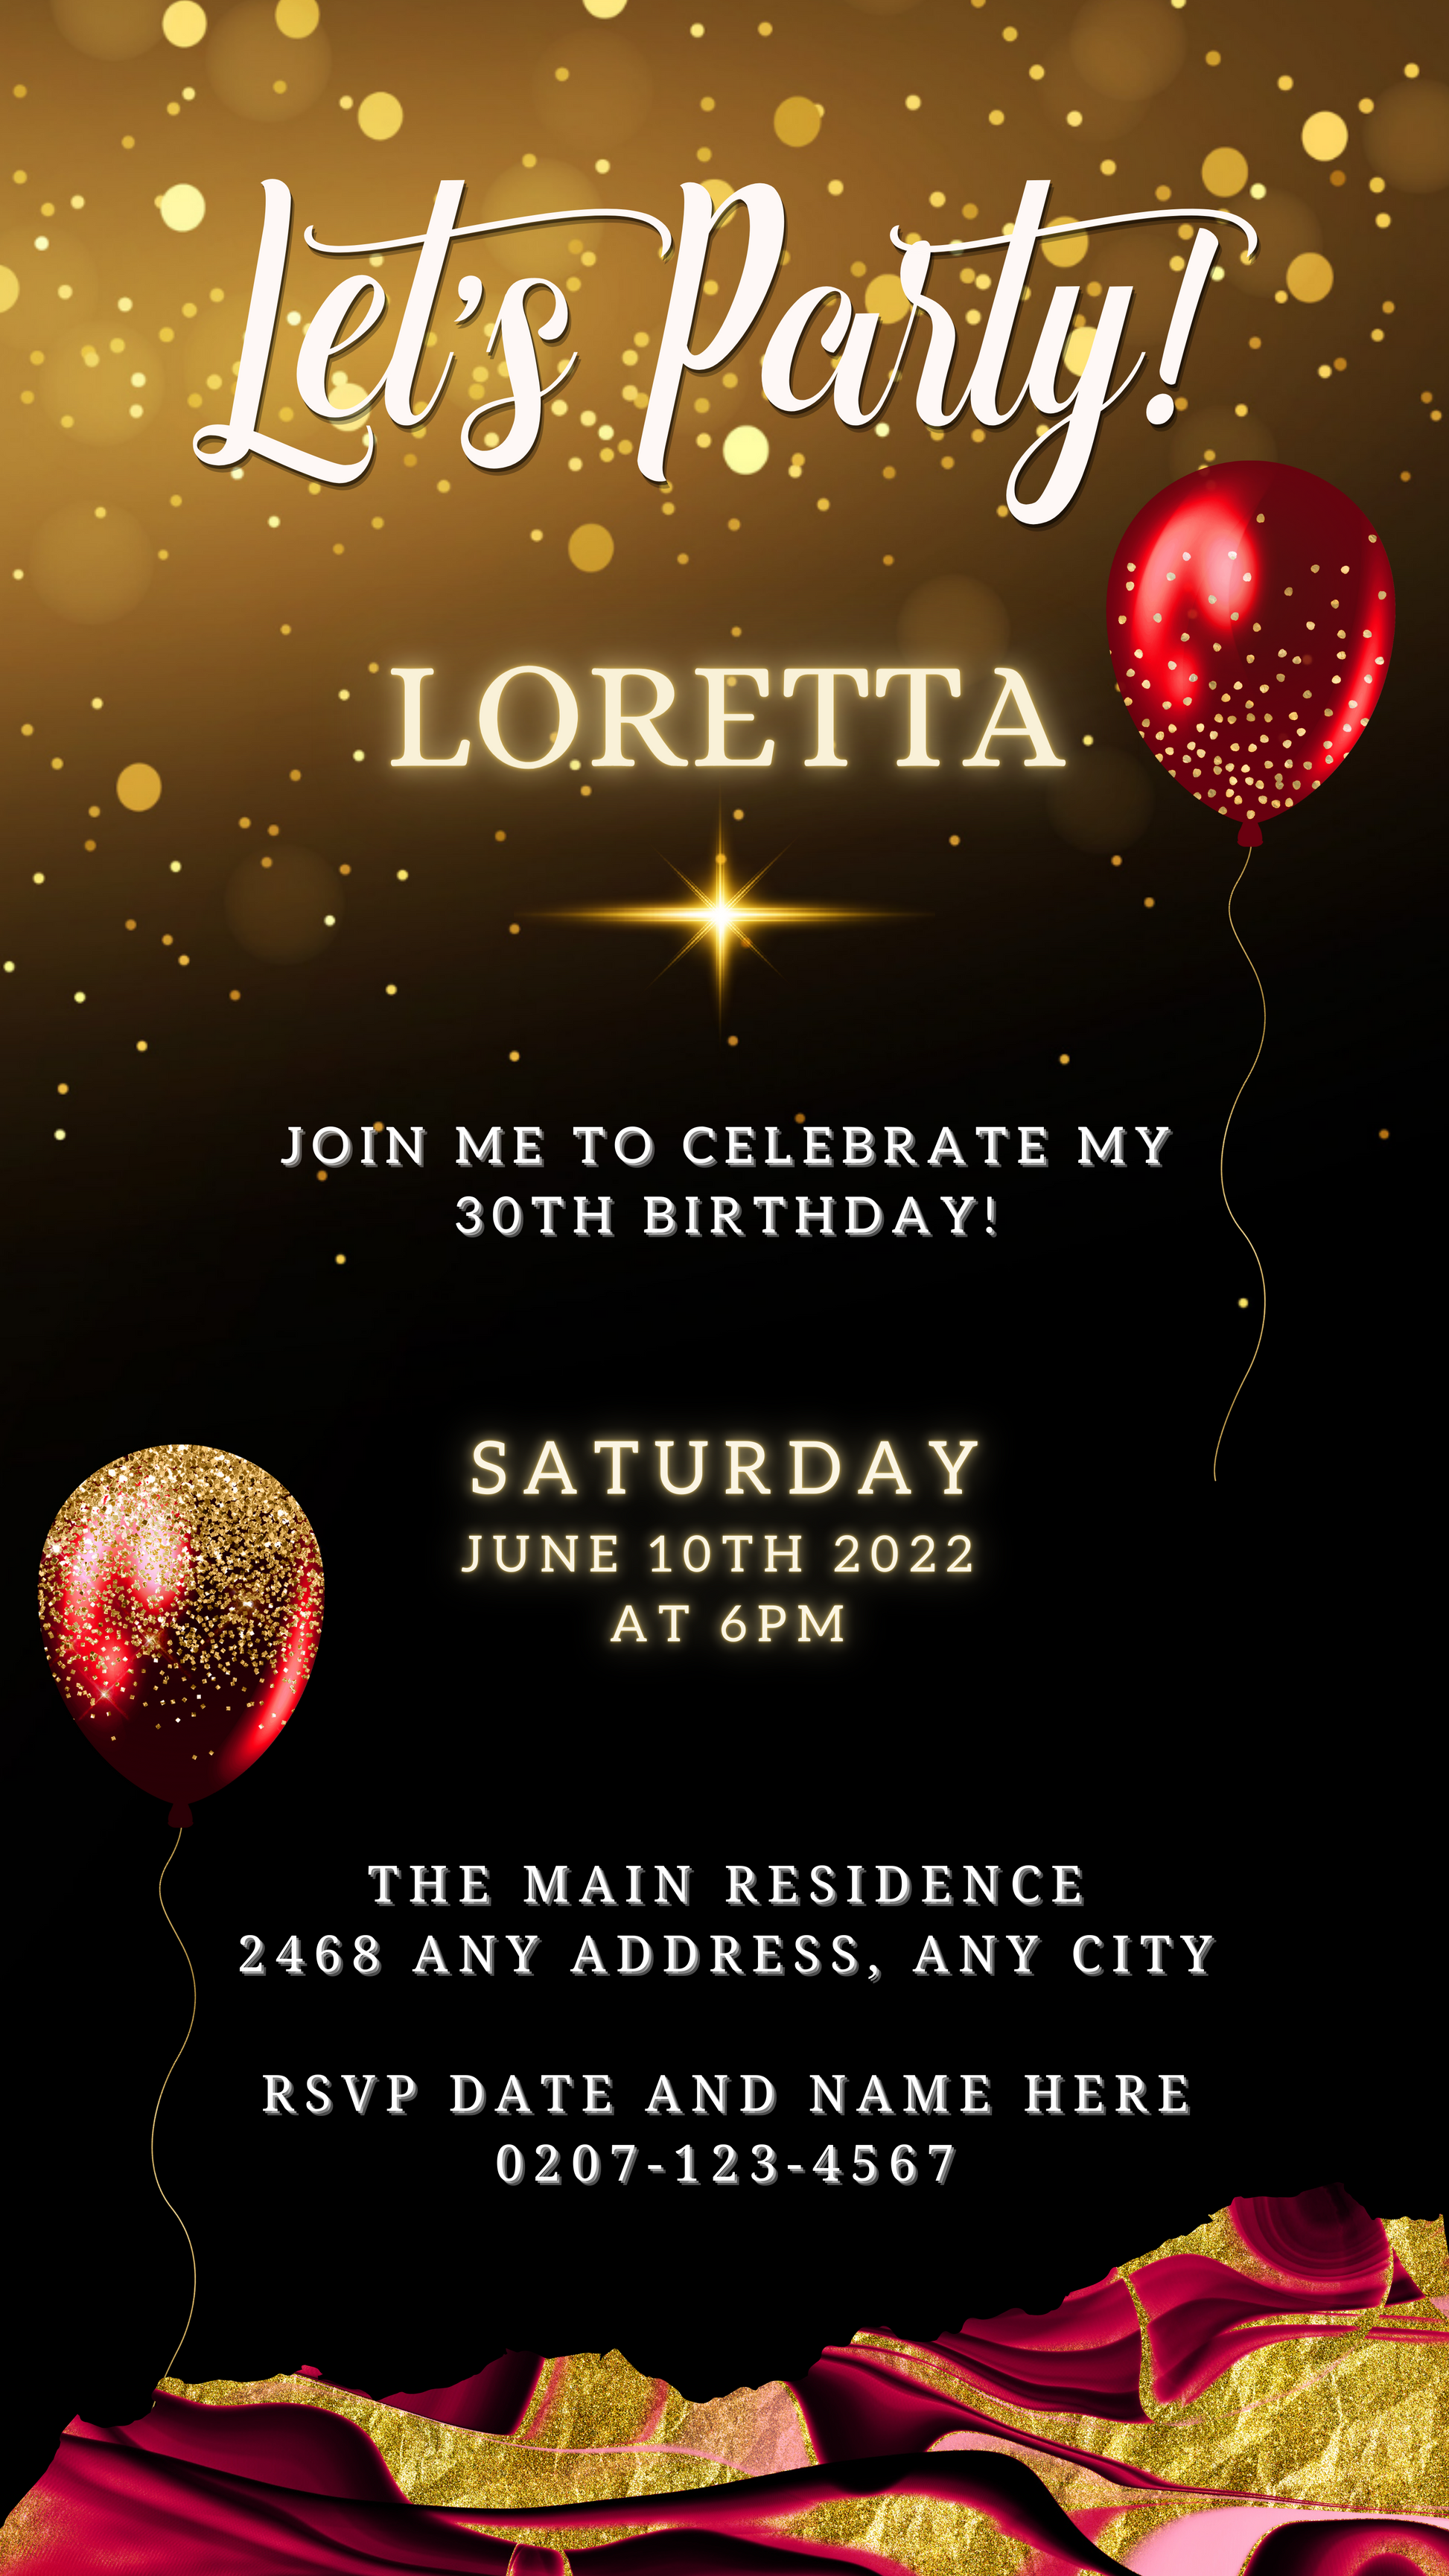 Birthday invitation template featuring burgundy and gold Ankara balloons with editable text, customizable via Canva for digital sharing on smartphones.